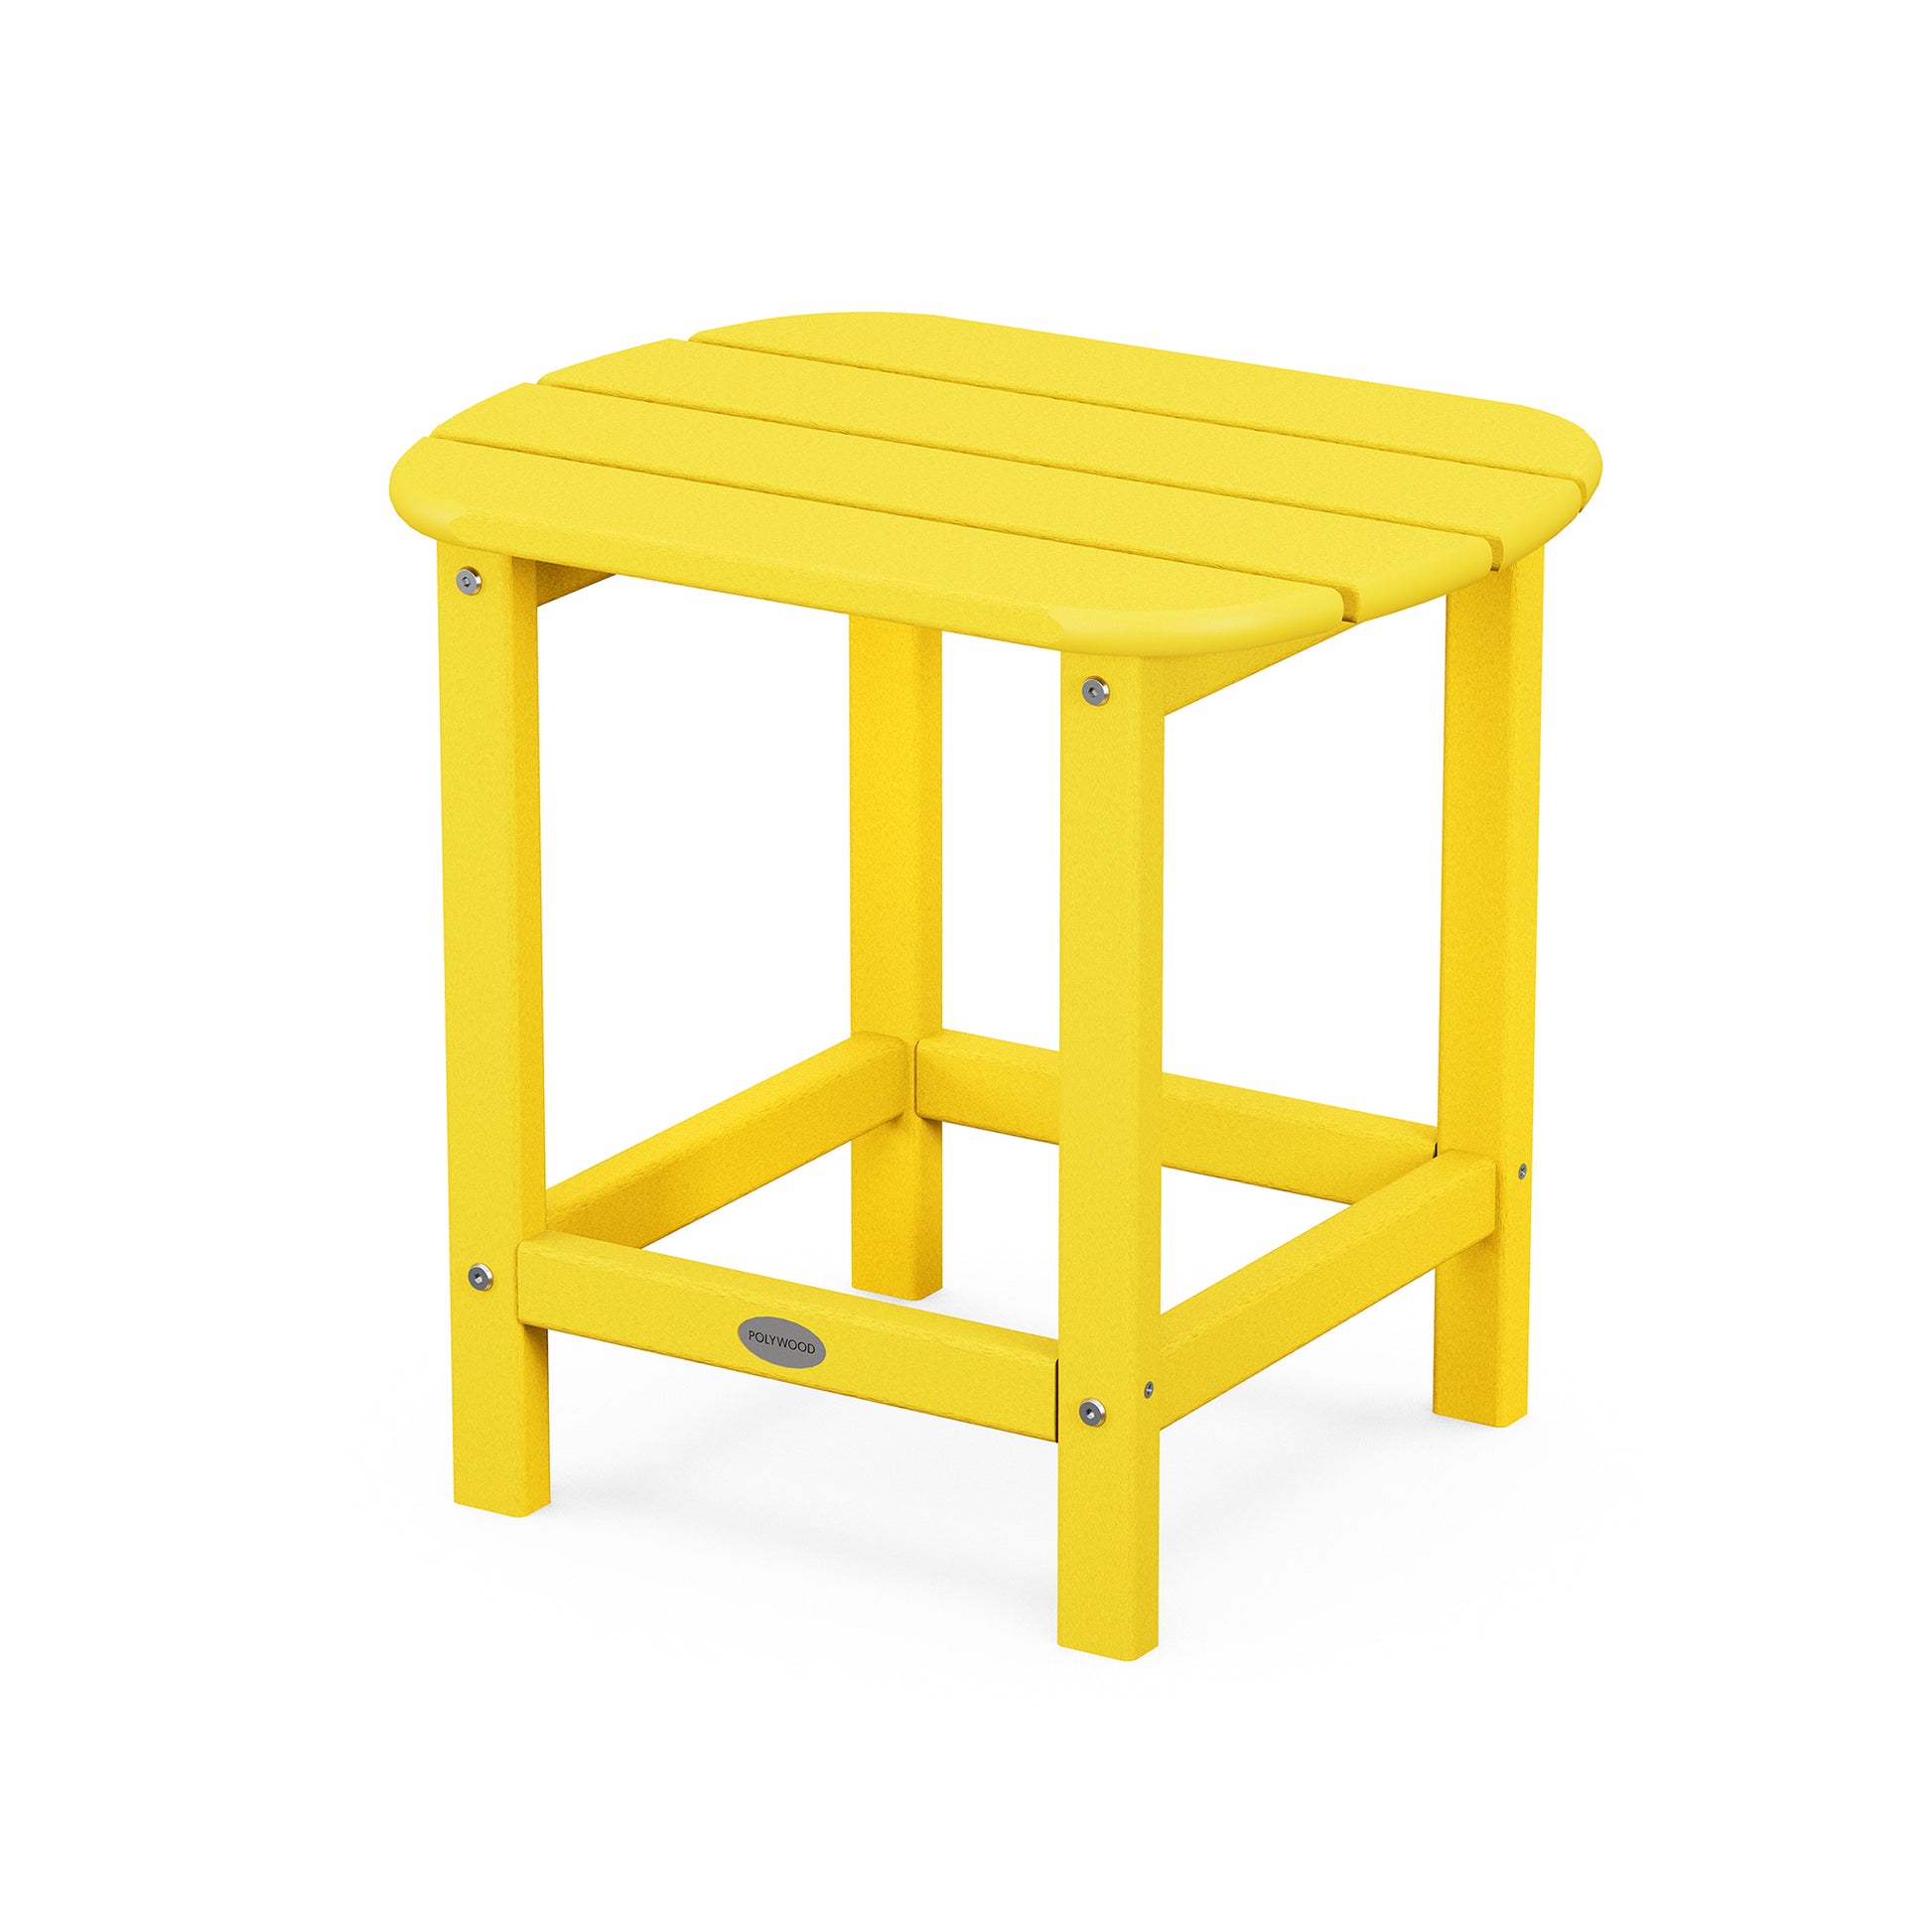 A bright yellow, POLYWOOD® South Beach Adirondack 18" Side Table with a simple, rectangular top and sturdy legs, isolated on a white background. The table has visible screws on each corner.